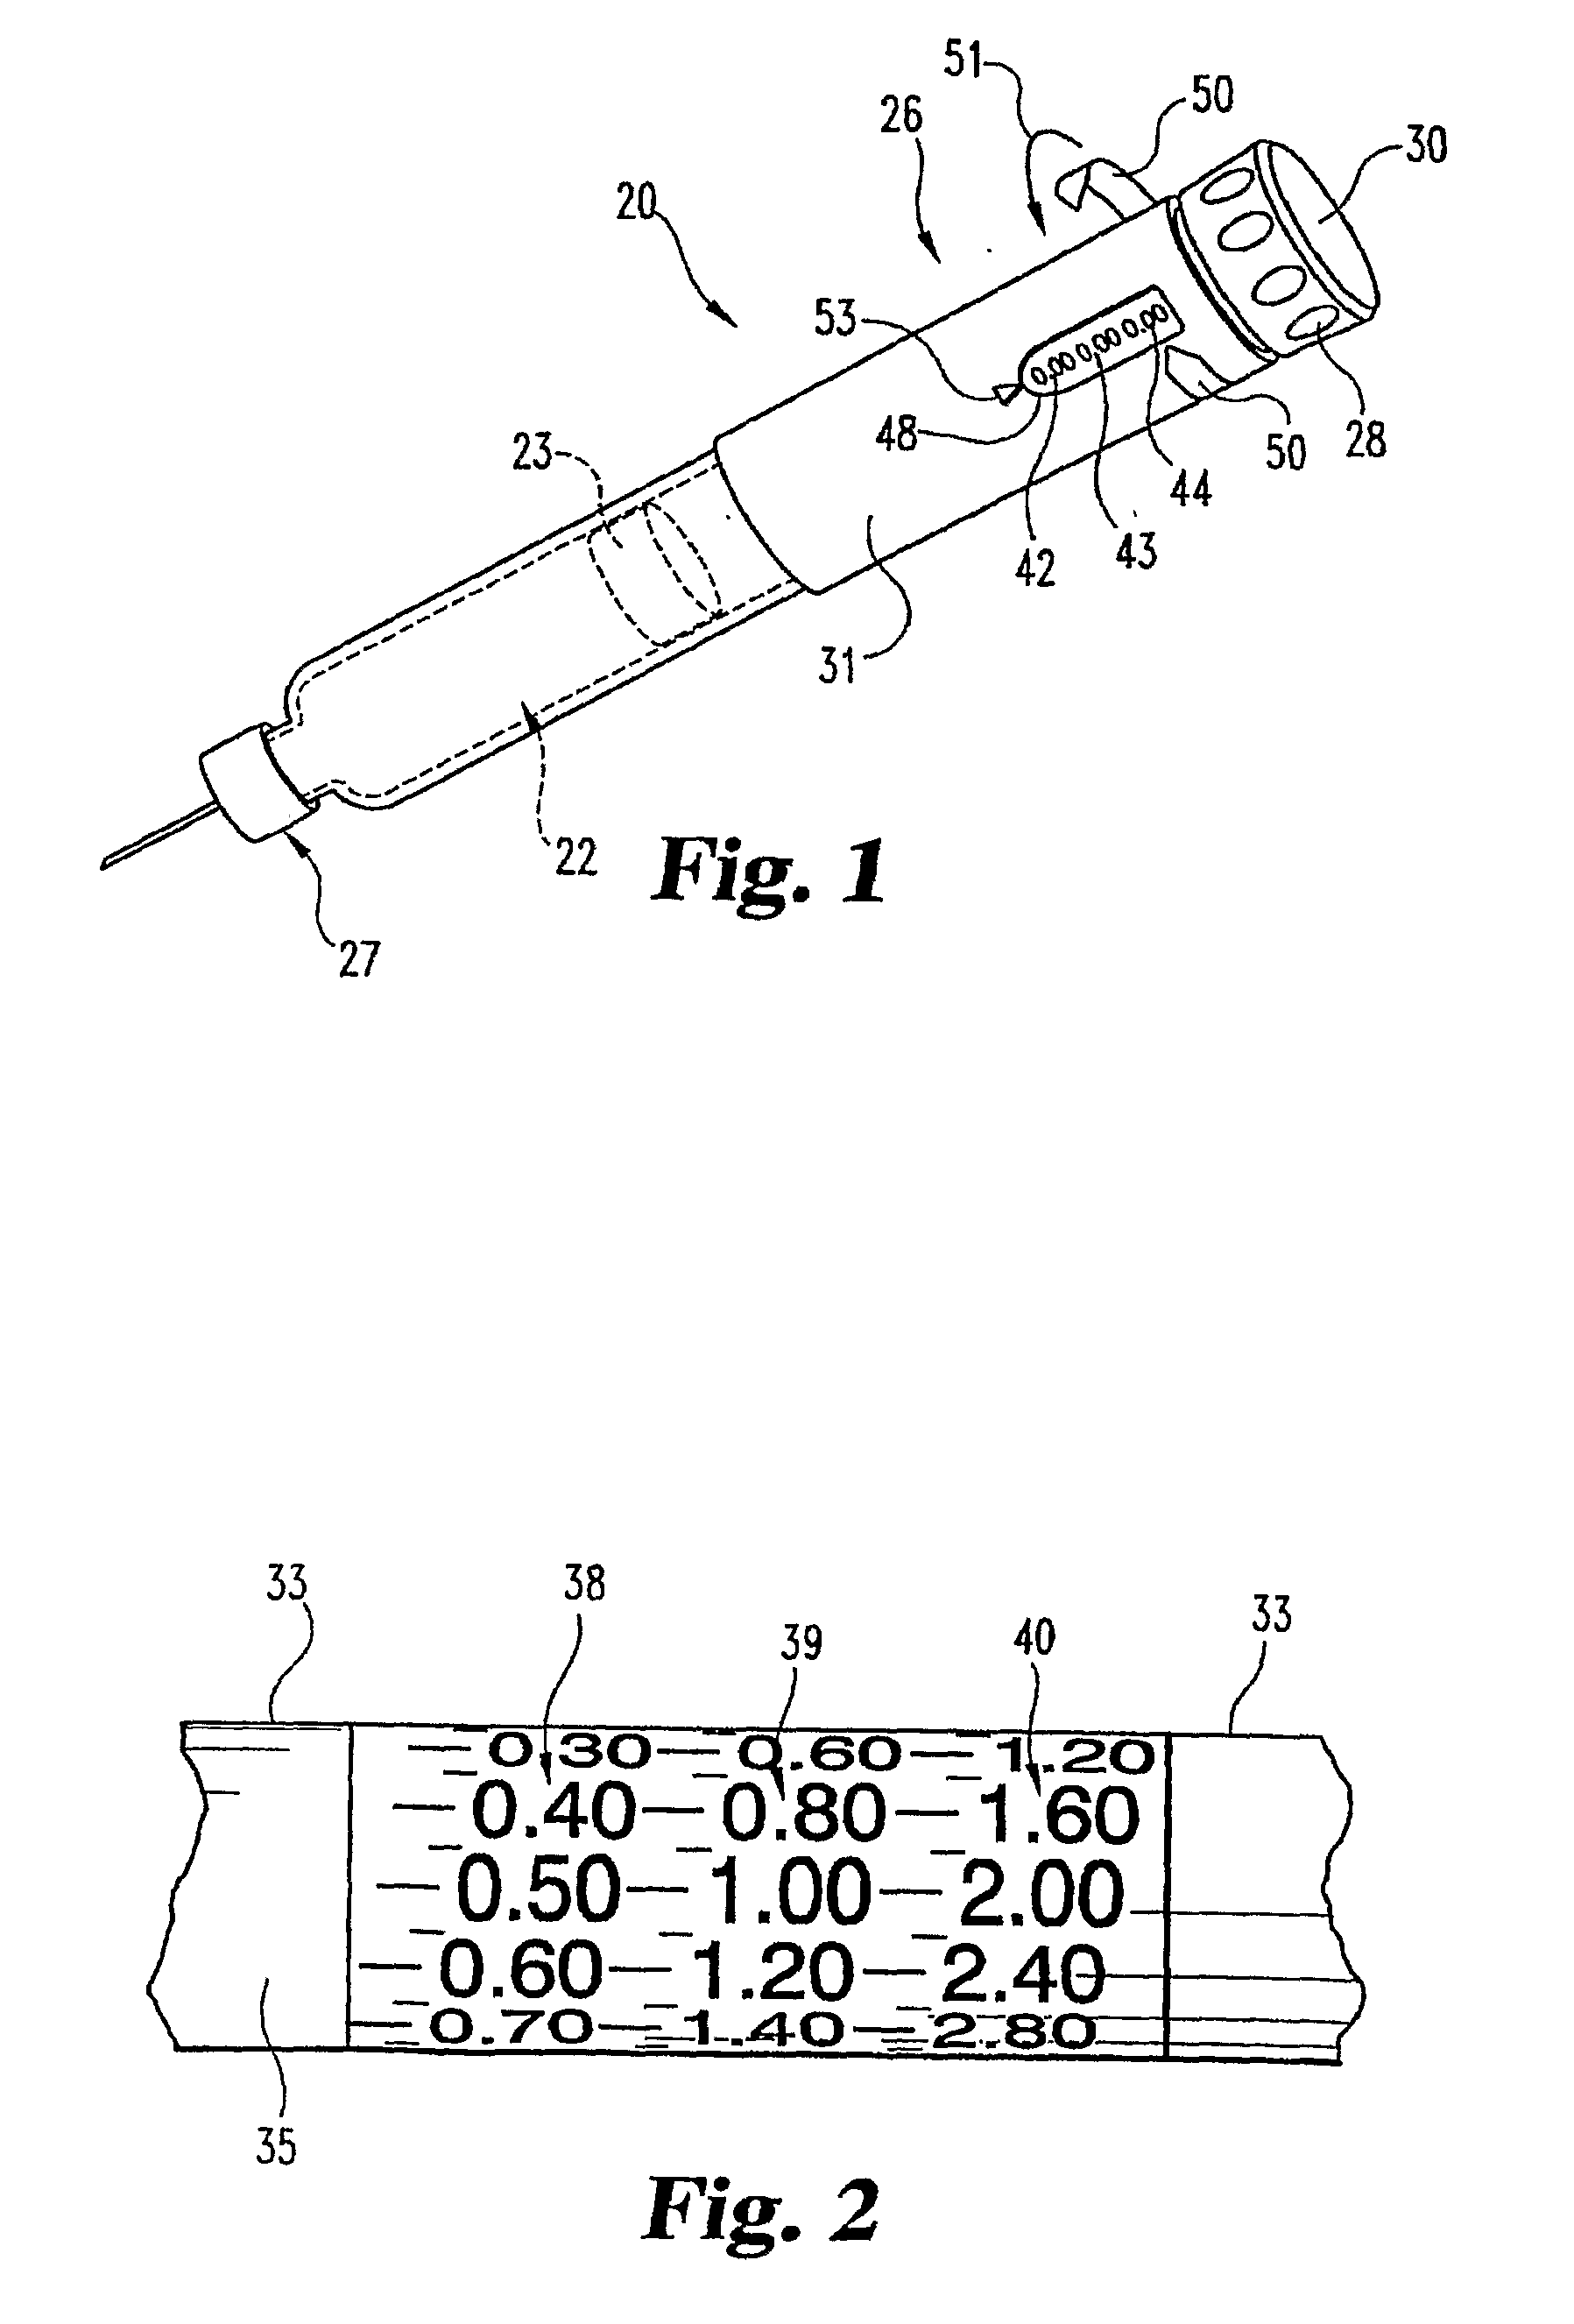 Dose Indicating Assembly of a Pharmaceutical Injection Device